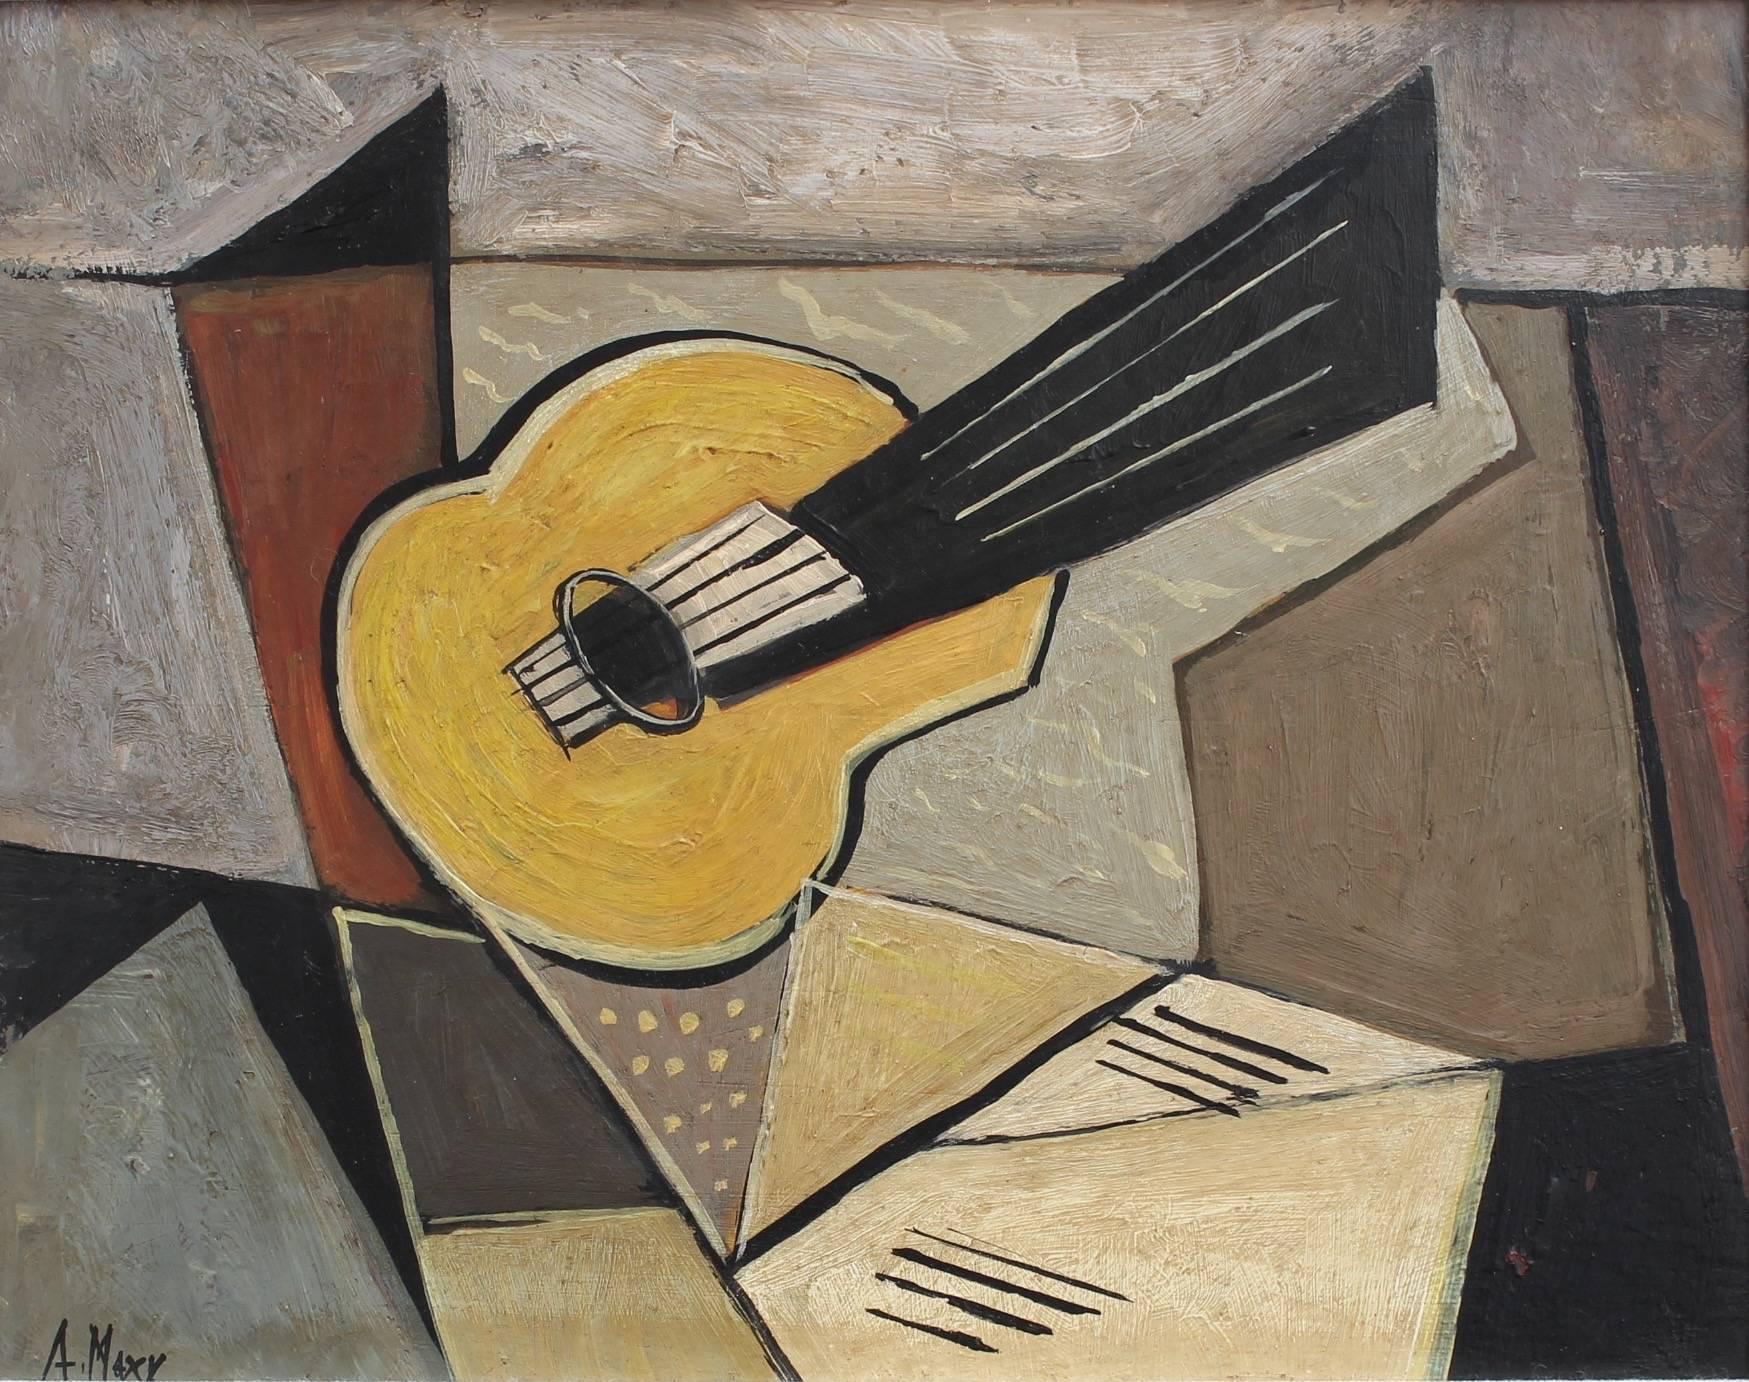 A. Maxy Abstract Painting - 'Musical Geometry' by A Maxy, Mid-Century Modern Cubist Oil Painting, Berlin